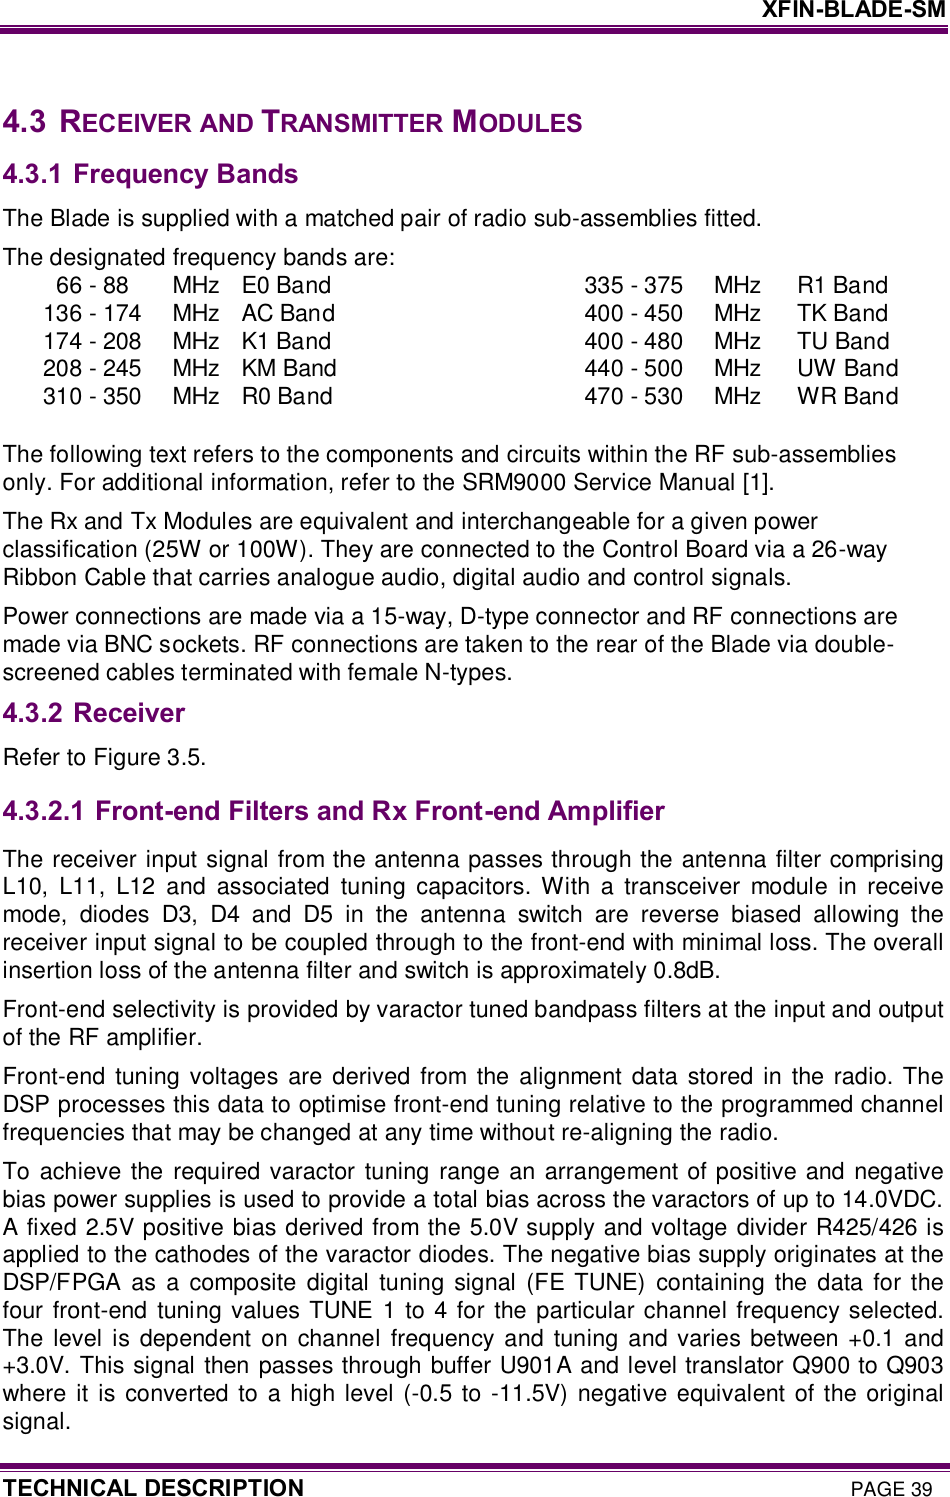     XFIN-BLADE-SM TECHNICAL DESCRIPTION PAGE 39  4.3  RECEIVER AND TRANSMITTER MODULES 4.3.1 Frequency Bands The Blade is supplied with a matched pair of radio sub-assemblies fitted. The designated frequency bands are: 66 - 88  MHz  E0 Band    335 - 375  MHz  R1 Band 136 - 174  MHz  AC Band    400 - 450  MHz  TK Band 174 - 208  MHz  K1 Band    400 - 480  MHz  TU Band 208 - 245  MHz  KM Band    440 - 500  MHz  UW Band 310 - 350  MHz  R0 Band    470 - 530  MHz  WR Band  The following text refers to the components and circuits within the RF sub-assemblies only. For additional information, refer to the SRM9000 Service Manual [1]. The Rx and Tx Modules are equivalent and interchangeable for a given power classification (25W or 100W). They are connected to the Control Board via a 26-way Ribbon Cable that carries analogue audio, digital audio and control signals. Power connections are made via a 15-way, D-type connector and RF connections are made via BNC sockets. RF connections are taken to the rear of the Blade via double-screened cables terminated with female N-types. 4.3.2 Receiver Refer to Figure 3.5. 4.3.2.1  Front-end Filters and Rx Front-end Amplifier The receiver input signal from the antenna passes through the antenna filter comprising L10,  L11,  L12  and  associated  tuning  capacitors.  With  a  transceiver  module  in  receive mode,  diodes  D3,  D4  and  D5  in  the  antenna  switch  are  reverse  biased  allowing  the receiver input signal to be coupled through to the front-end with minimal loss. The overall insertion loss of the antenna filter and switch is approximately 0.8dB.  Front-end selectivity is provided by varactor tuned bandpass filters at the input and output of the RF amplifier.  Front-end  tuning voltages  are  derived  from the alignment  data  stored  in the  radio. The DSP processes this data to optimise front-end tuning relative to the programmed channel frequencies that may be changed at any time without re-aligning the radio.  To achieve the required  varactor tuning range  an  arrangement of positive and negative bias power supplies is used to provide a total bias across the varactors of up to 14.0VDC. A fixed 2.5V positive bias derived from the 5.0V supply and voltage divider R425/426 is applied to the cathodes of the varactor diodes. The negative bias supply originates at the DSP/FPGA  as  a composite  digital  tuning  signal (FE  TUNE) containing  the data  for the four front-end tuning  values TUNE  1  to  4 for the particular channel frequency selected.  The  level is  dependent on  channel  frequency and  tuning and  varies between +0.1  and +3.0V. This signal then passes through buffer U901A and level translator Q900 to Q903 where  it  is converted  to a high level (-0.5 to  -11.5V) negative equivalent  of the  original signal.  